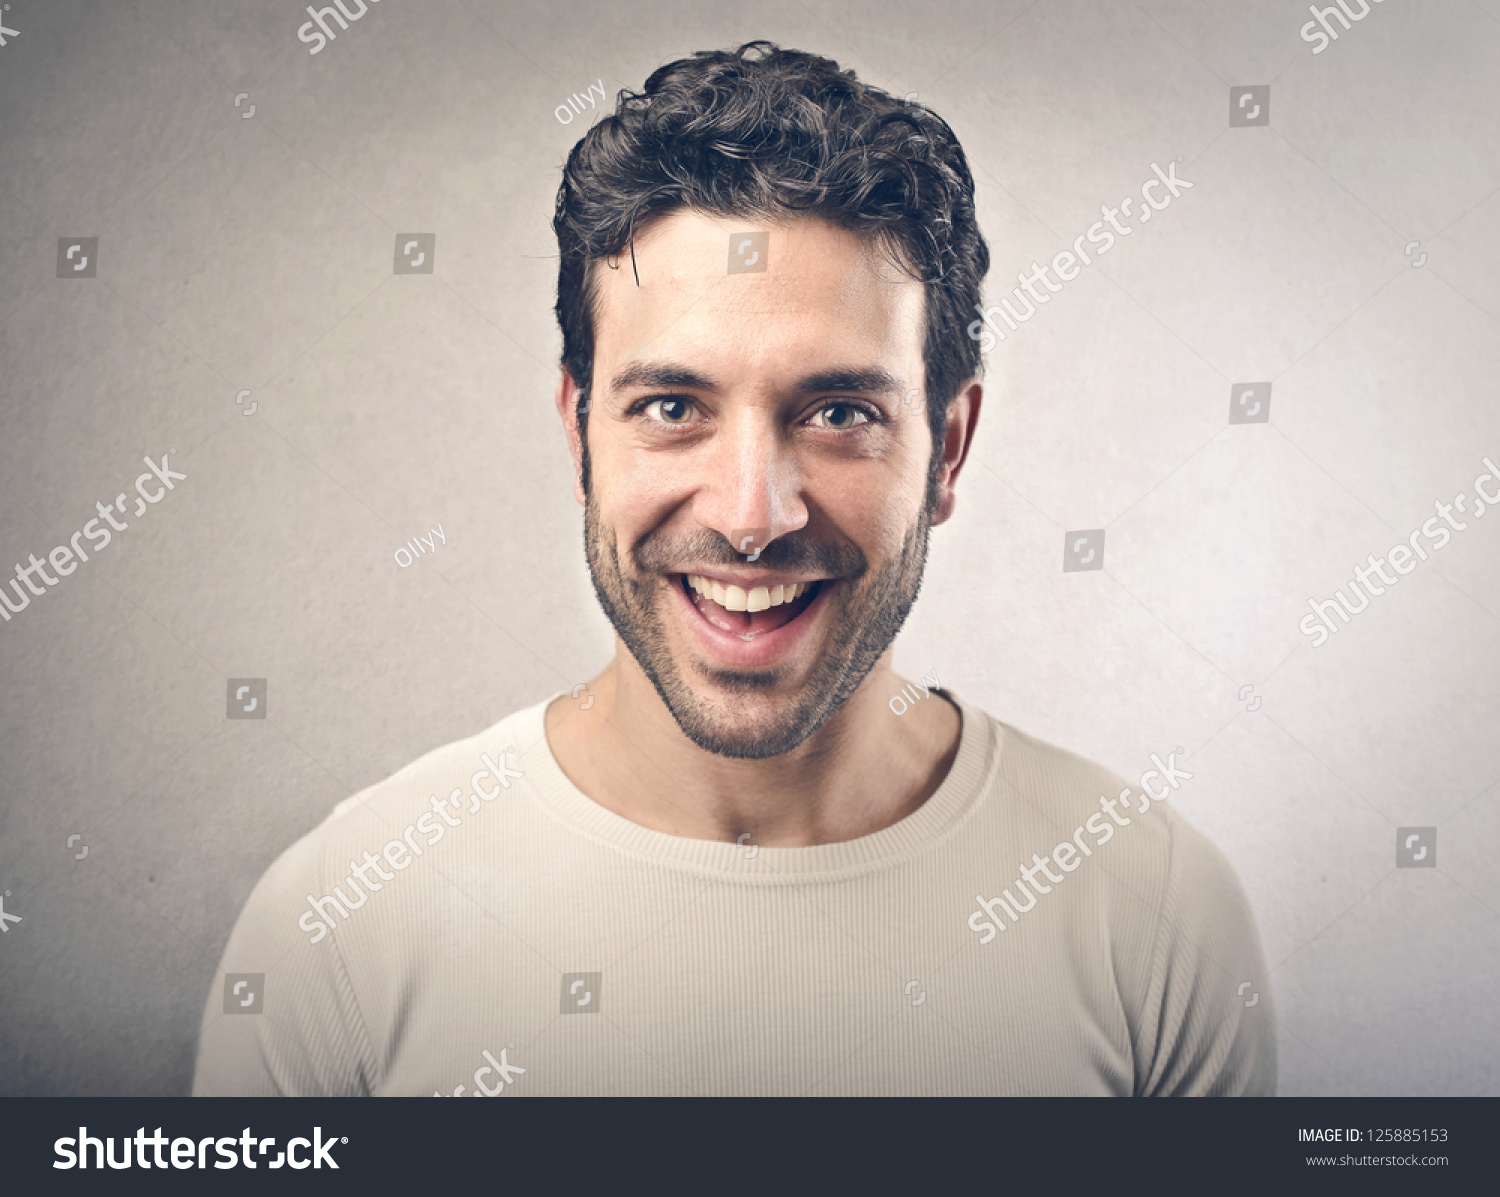 Laughing Young Man Stock Photo 125885153 : Shutterstock